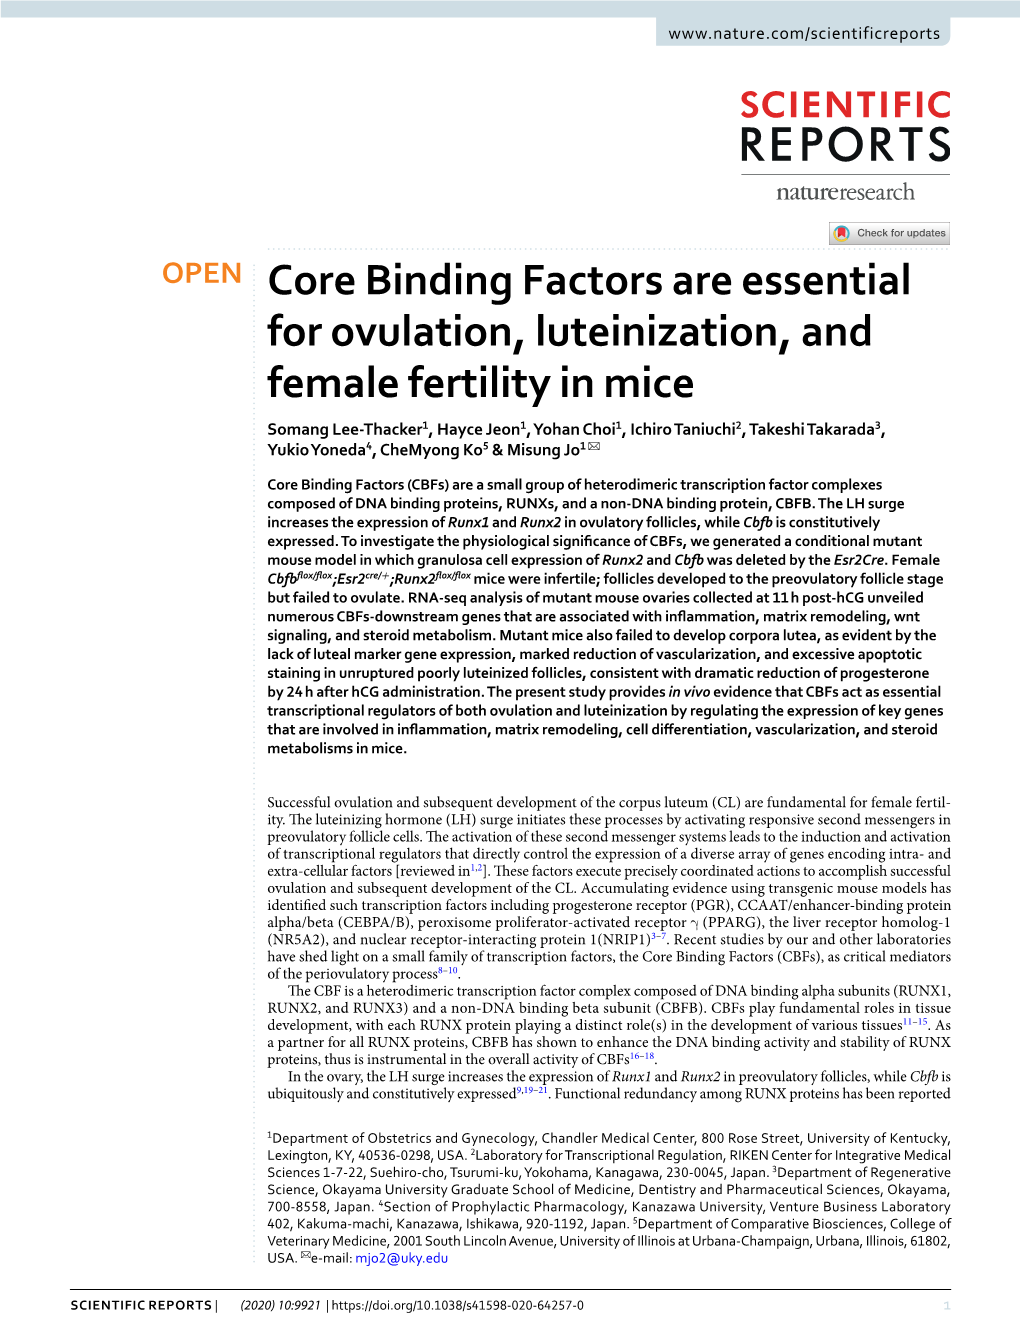 Core Binding Factors Are Essential for Ovulation, Luteinization, and Female